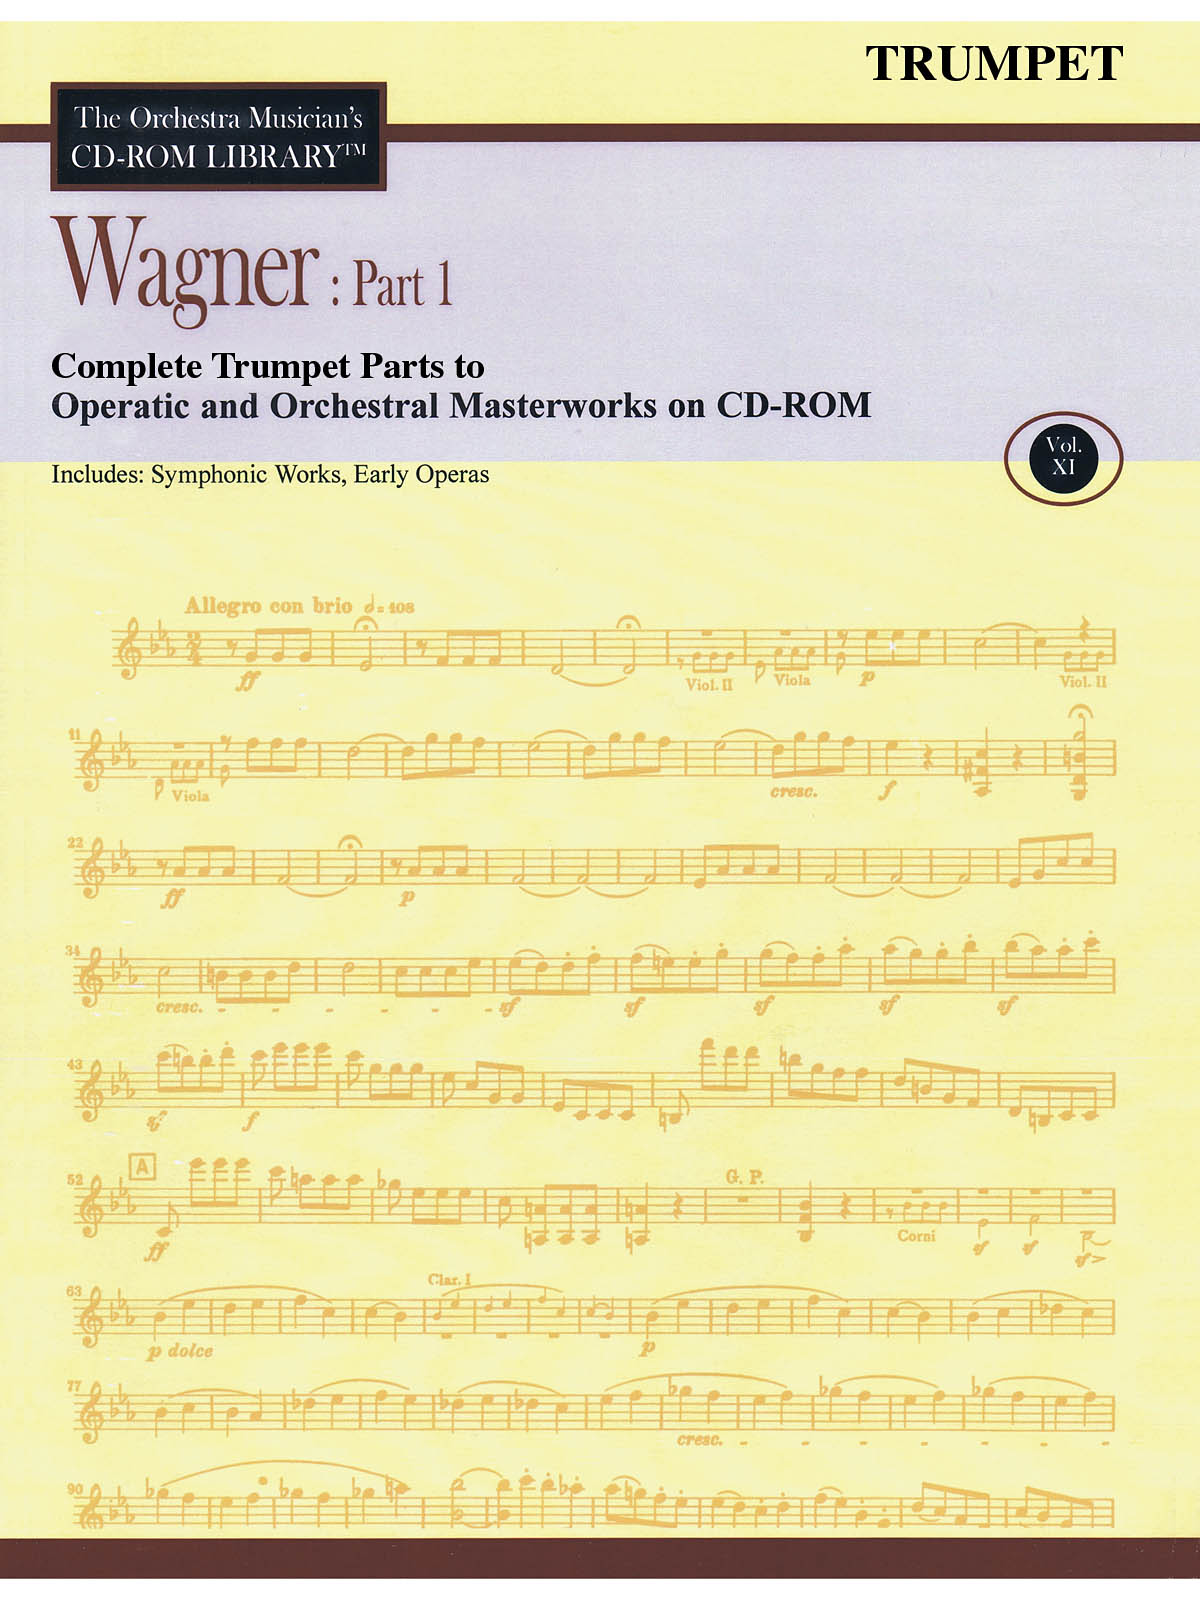 Wagner: Part 1 - Volume 11(The Orchestra Musician's CD-ROM Library - Trumpet)